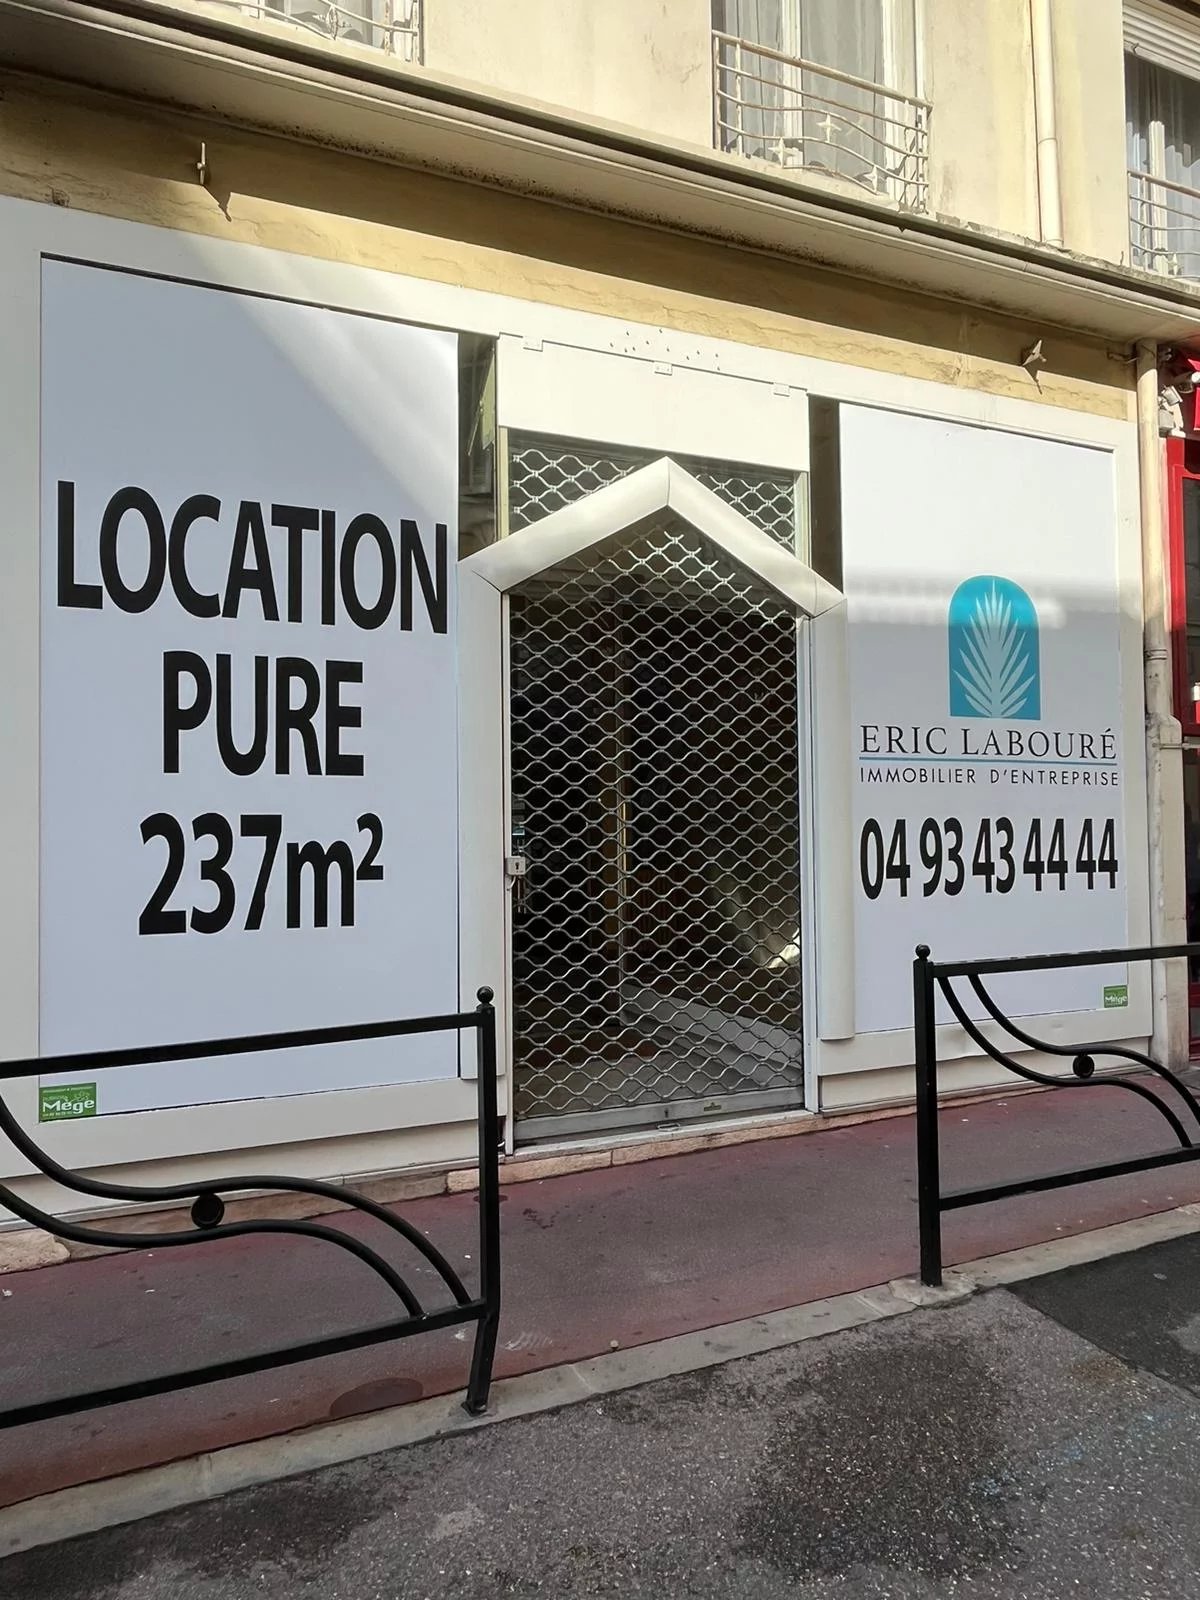 Cannes banane location pure local commercial 237 m2 + sous sol